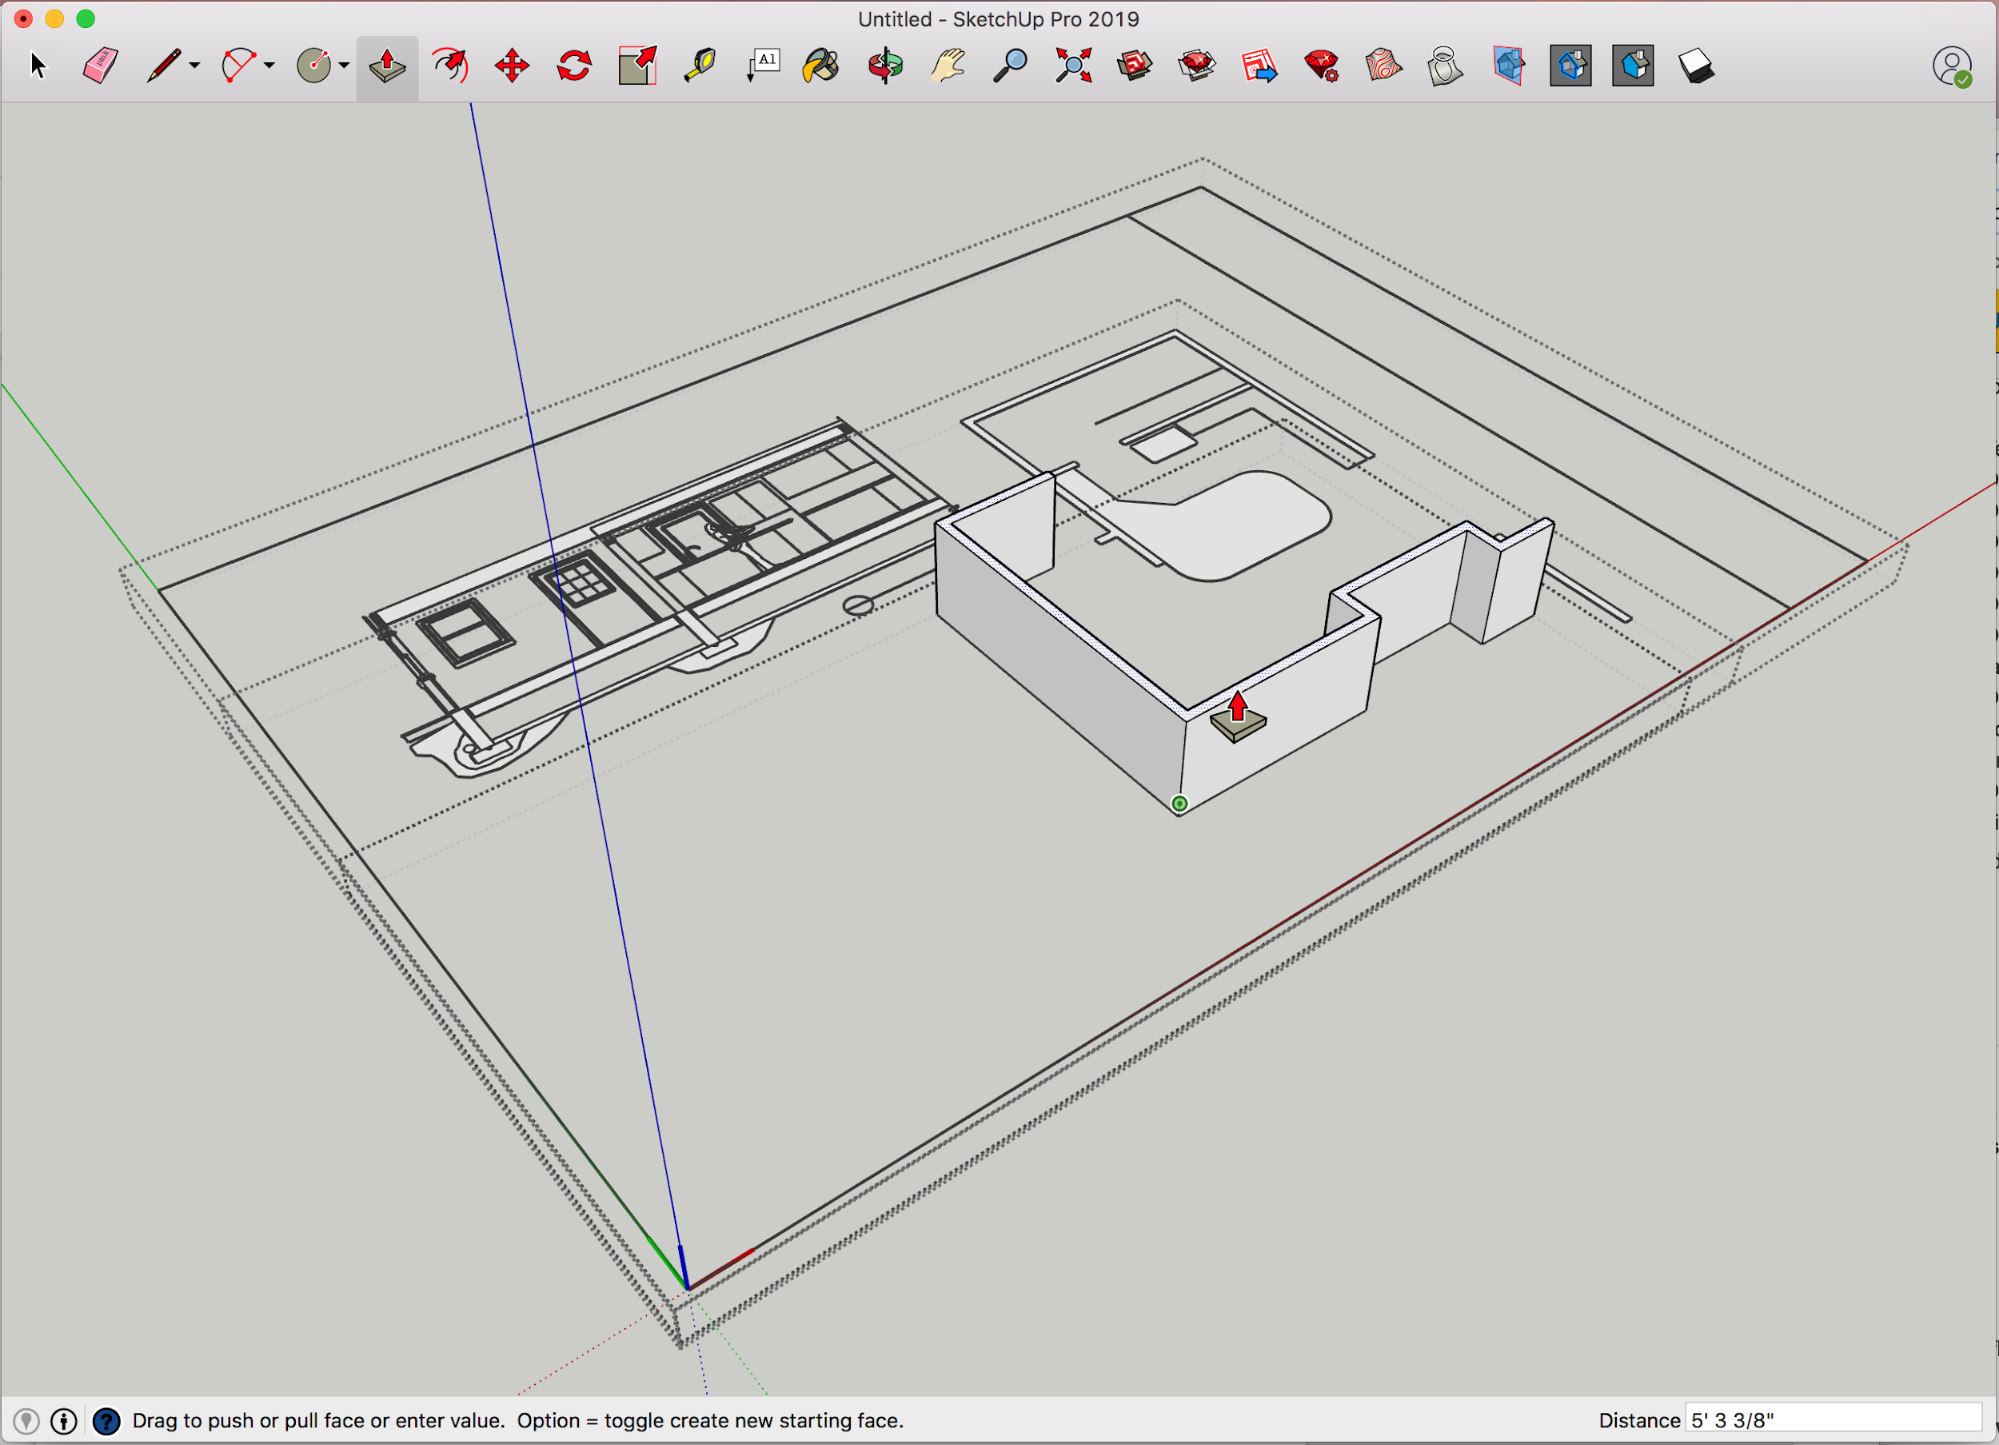 Plan and Elevation imported into SketchUp via the new “Export to SketchUp” option